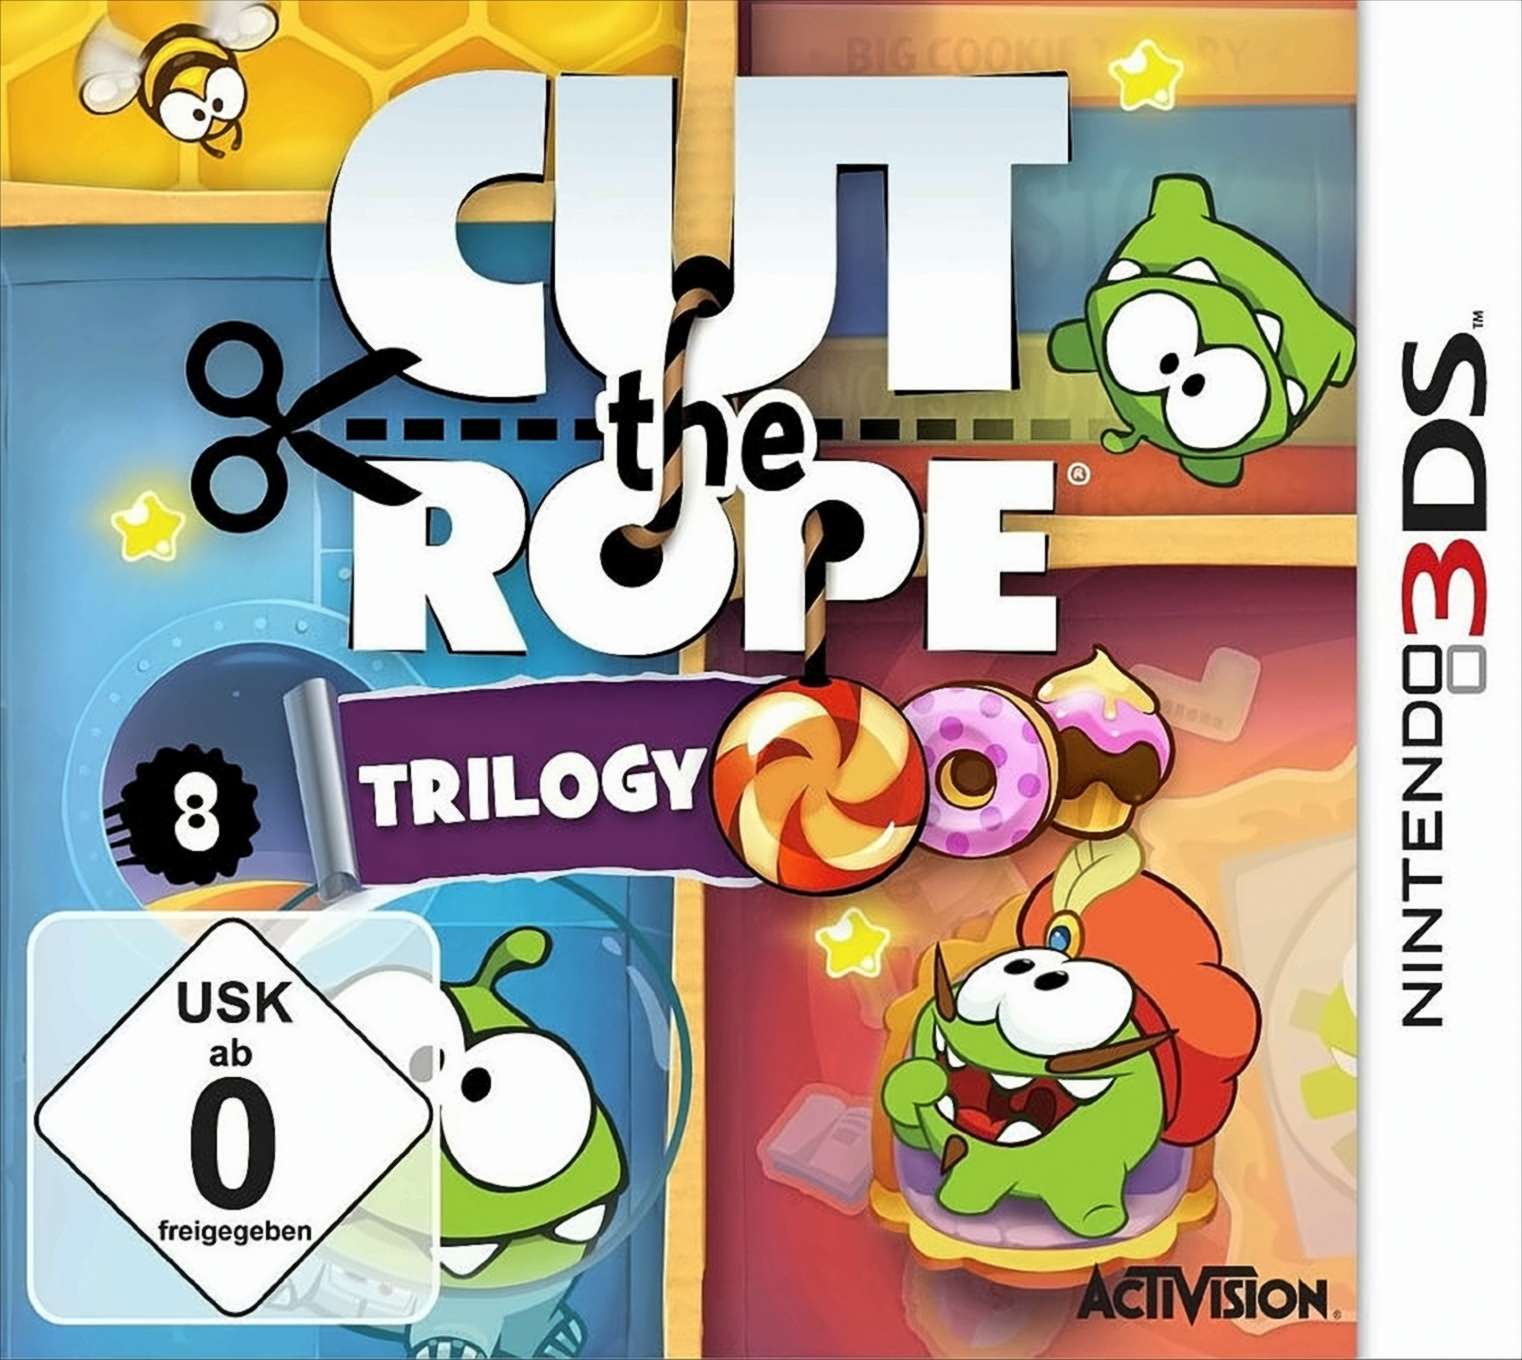 Cut The [Nintendo Trilogy 3DS] Rope 